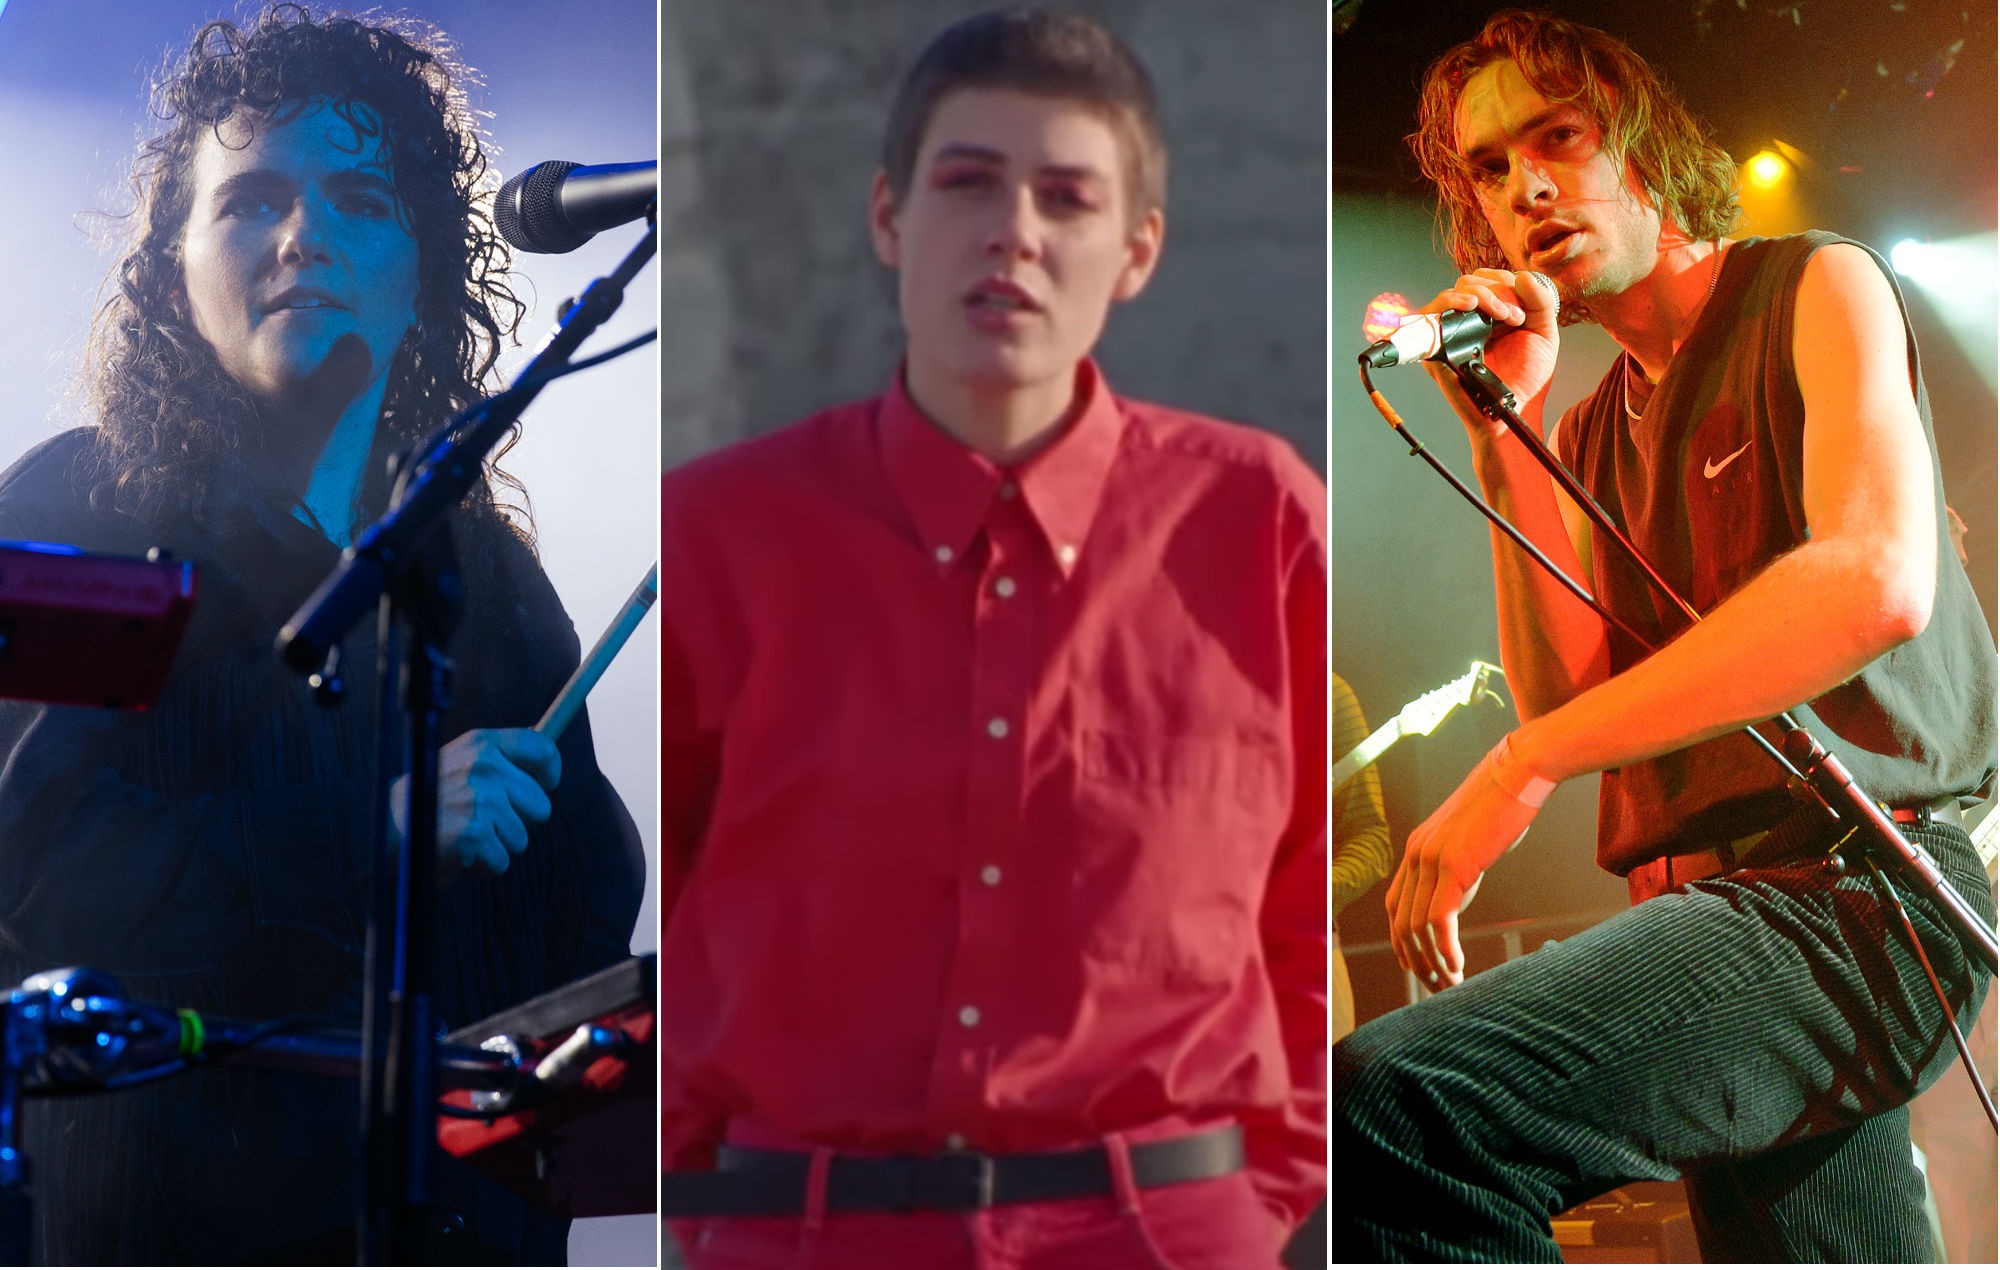 “It’s bigger than anything else”: Mercury Prize nominees on why they’re gunning for glory